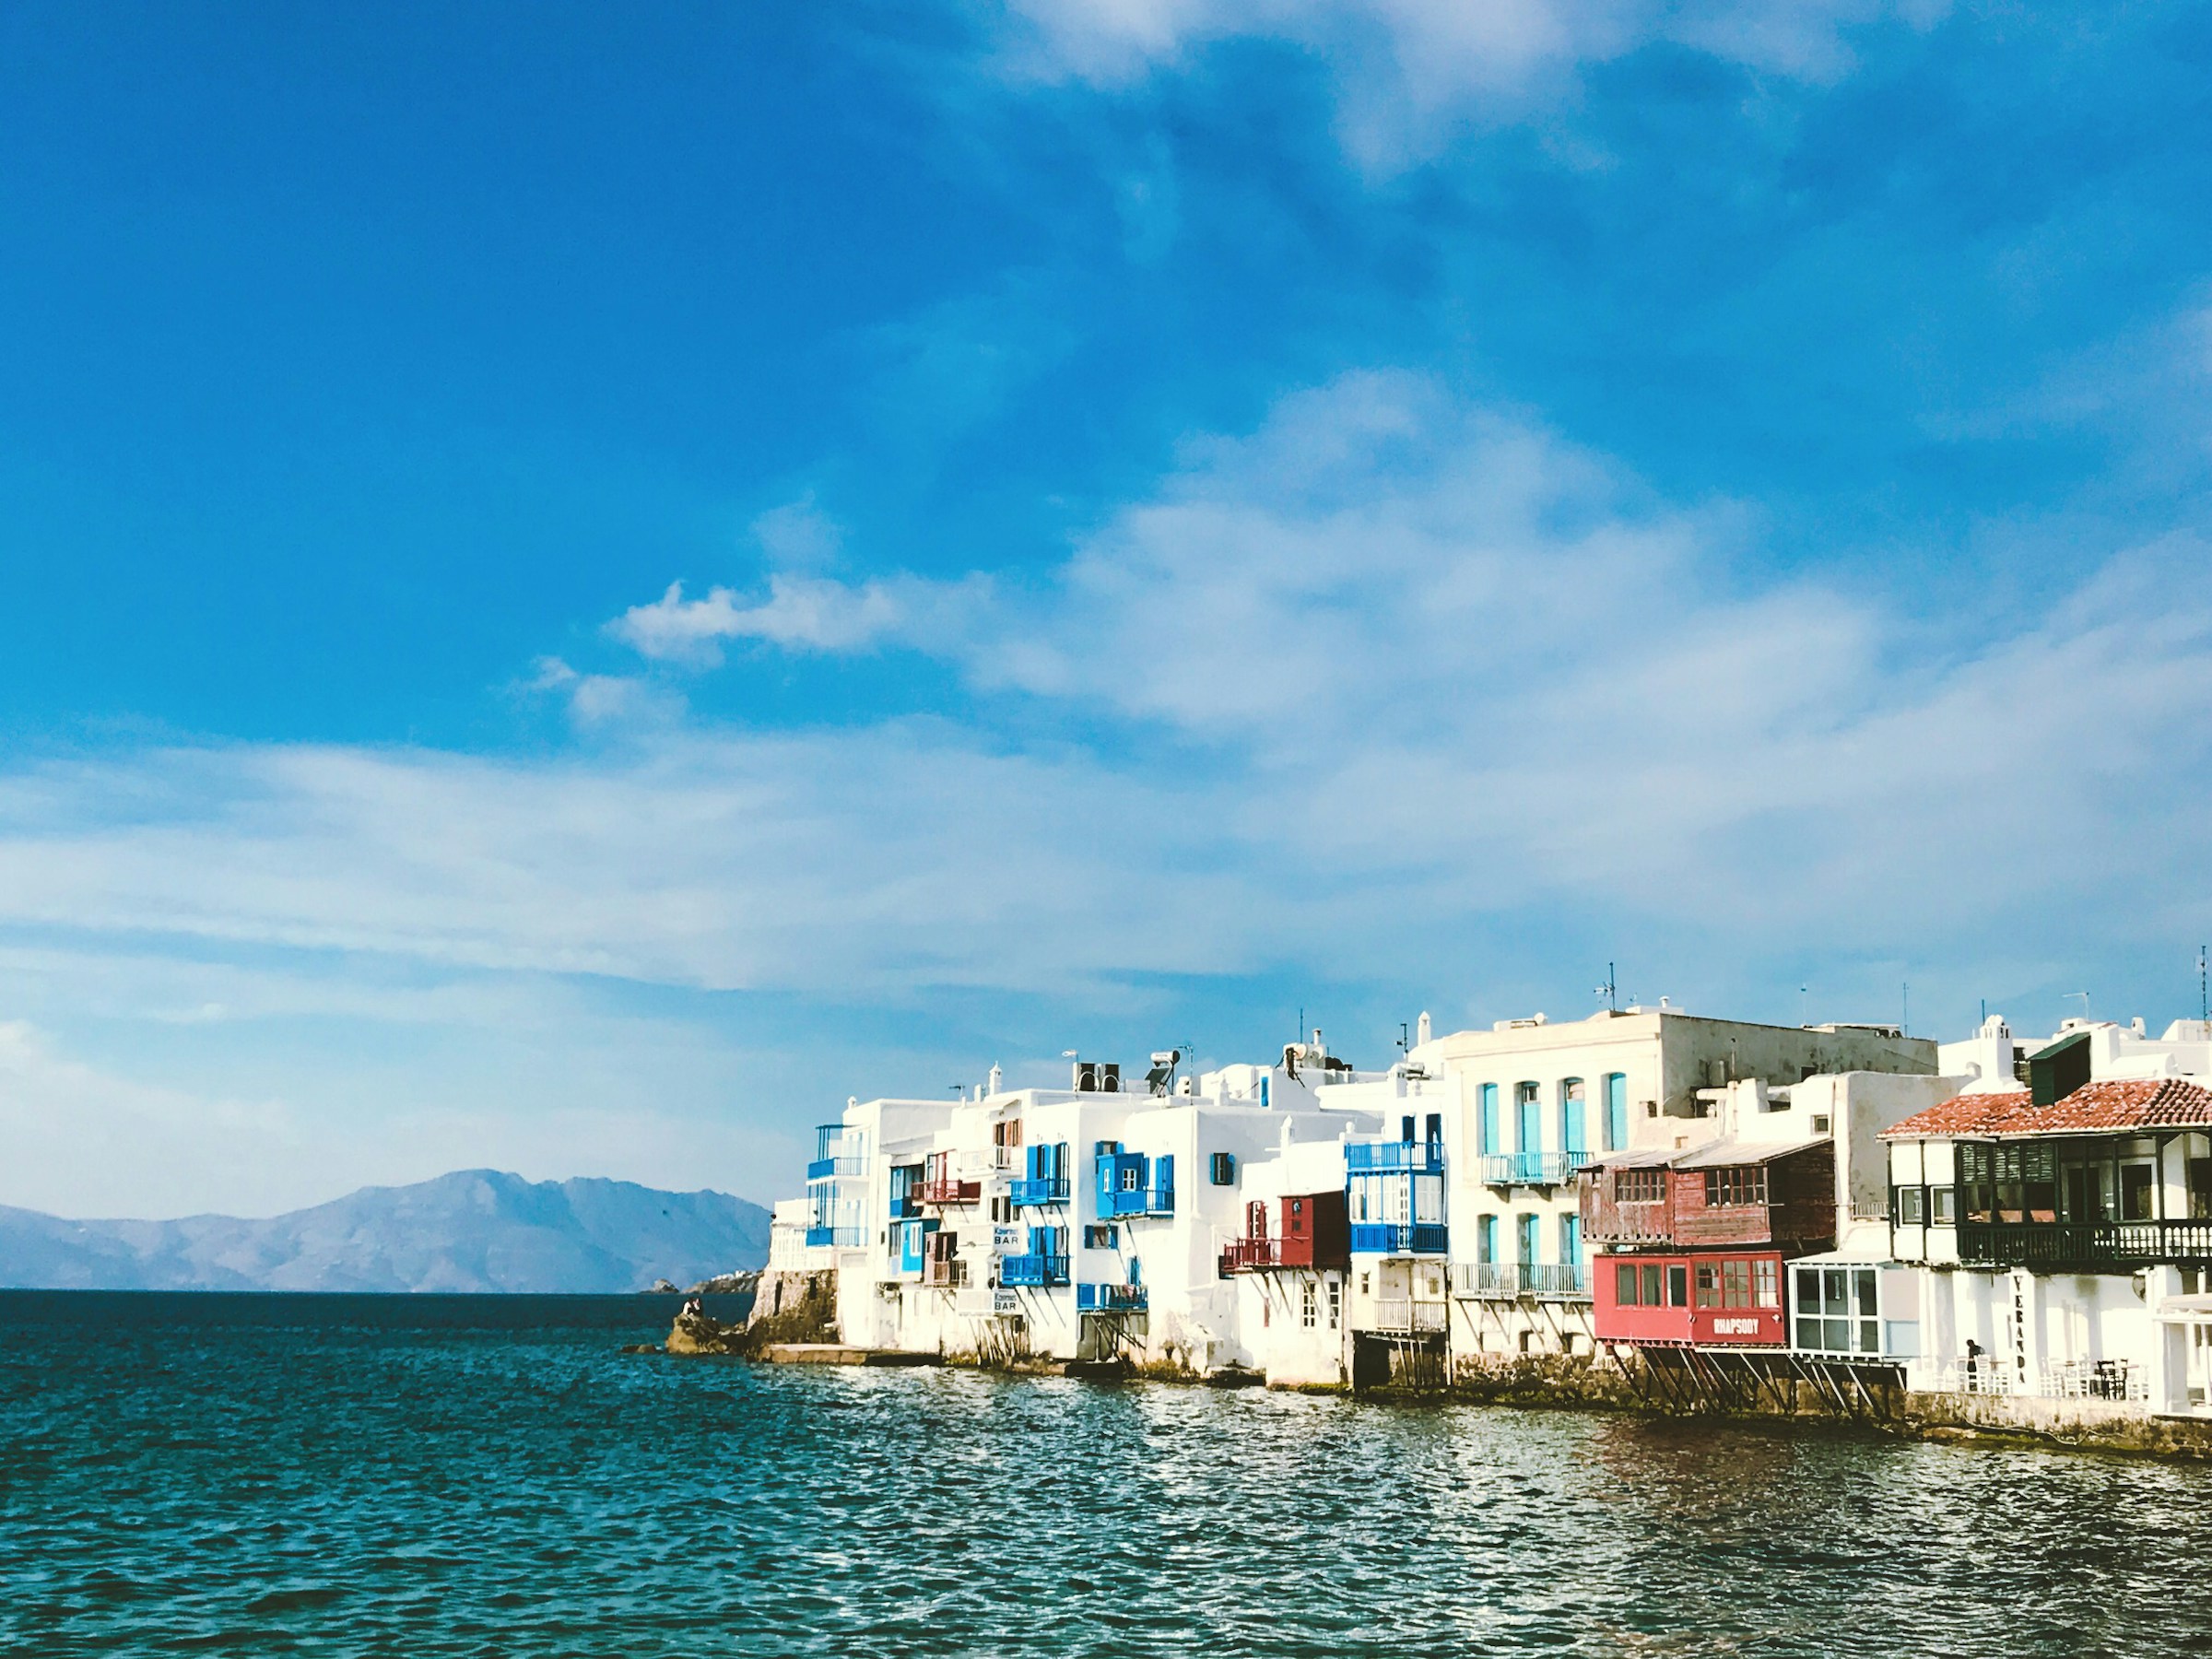 The hedonist’s guide to the best beaches, restaurants and luxury villas in Mykonos